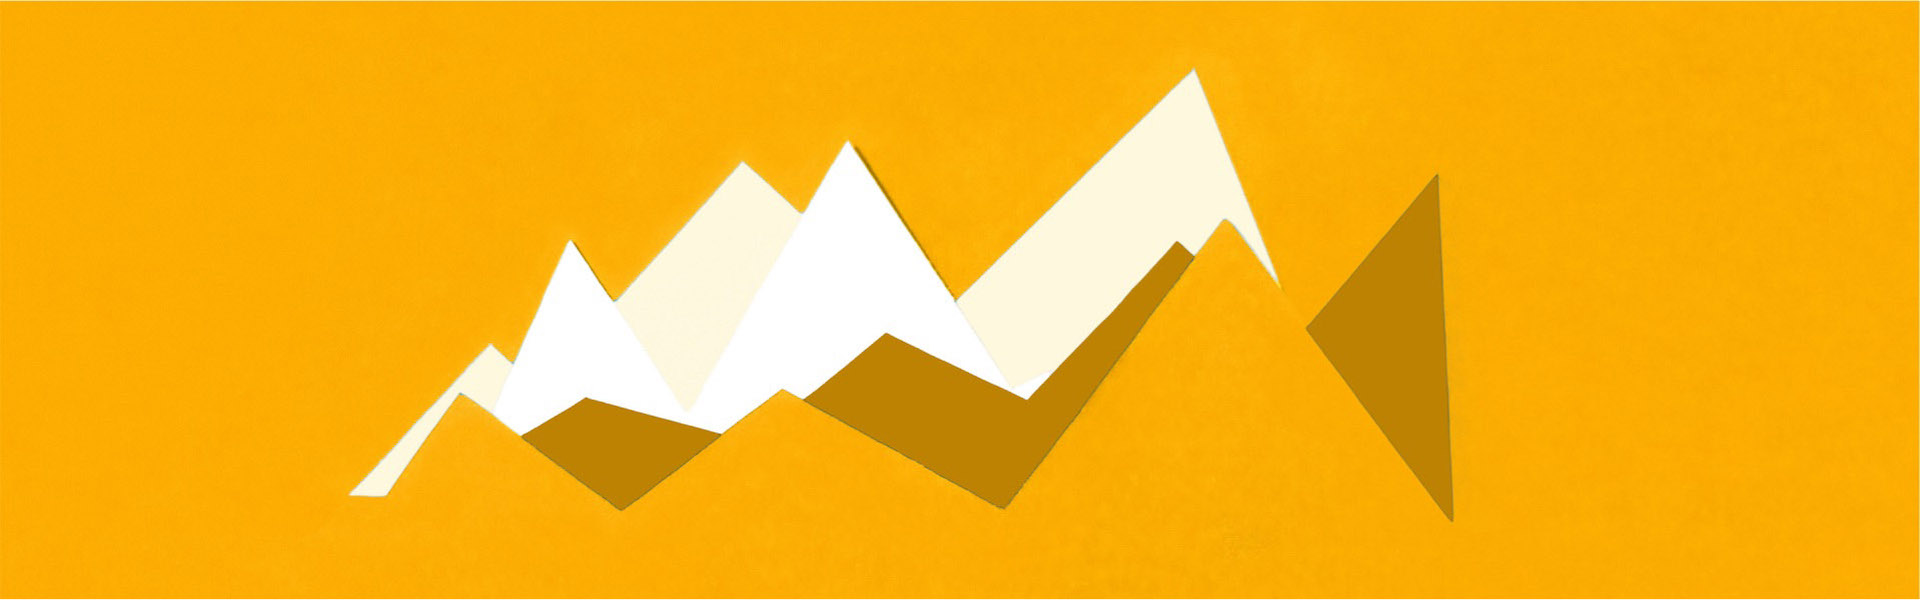 A yellow graphic depicts the peaks and valleys of a mountain range.